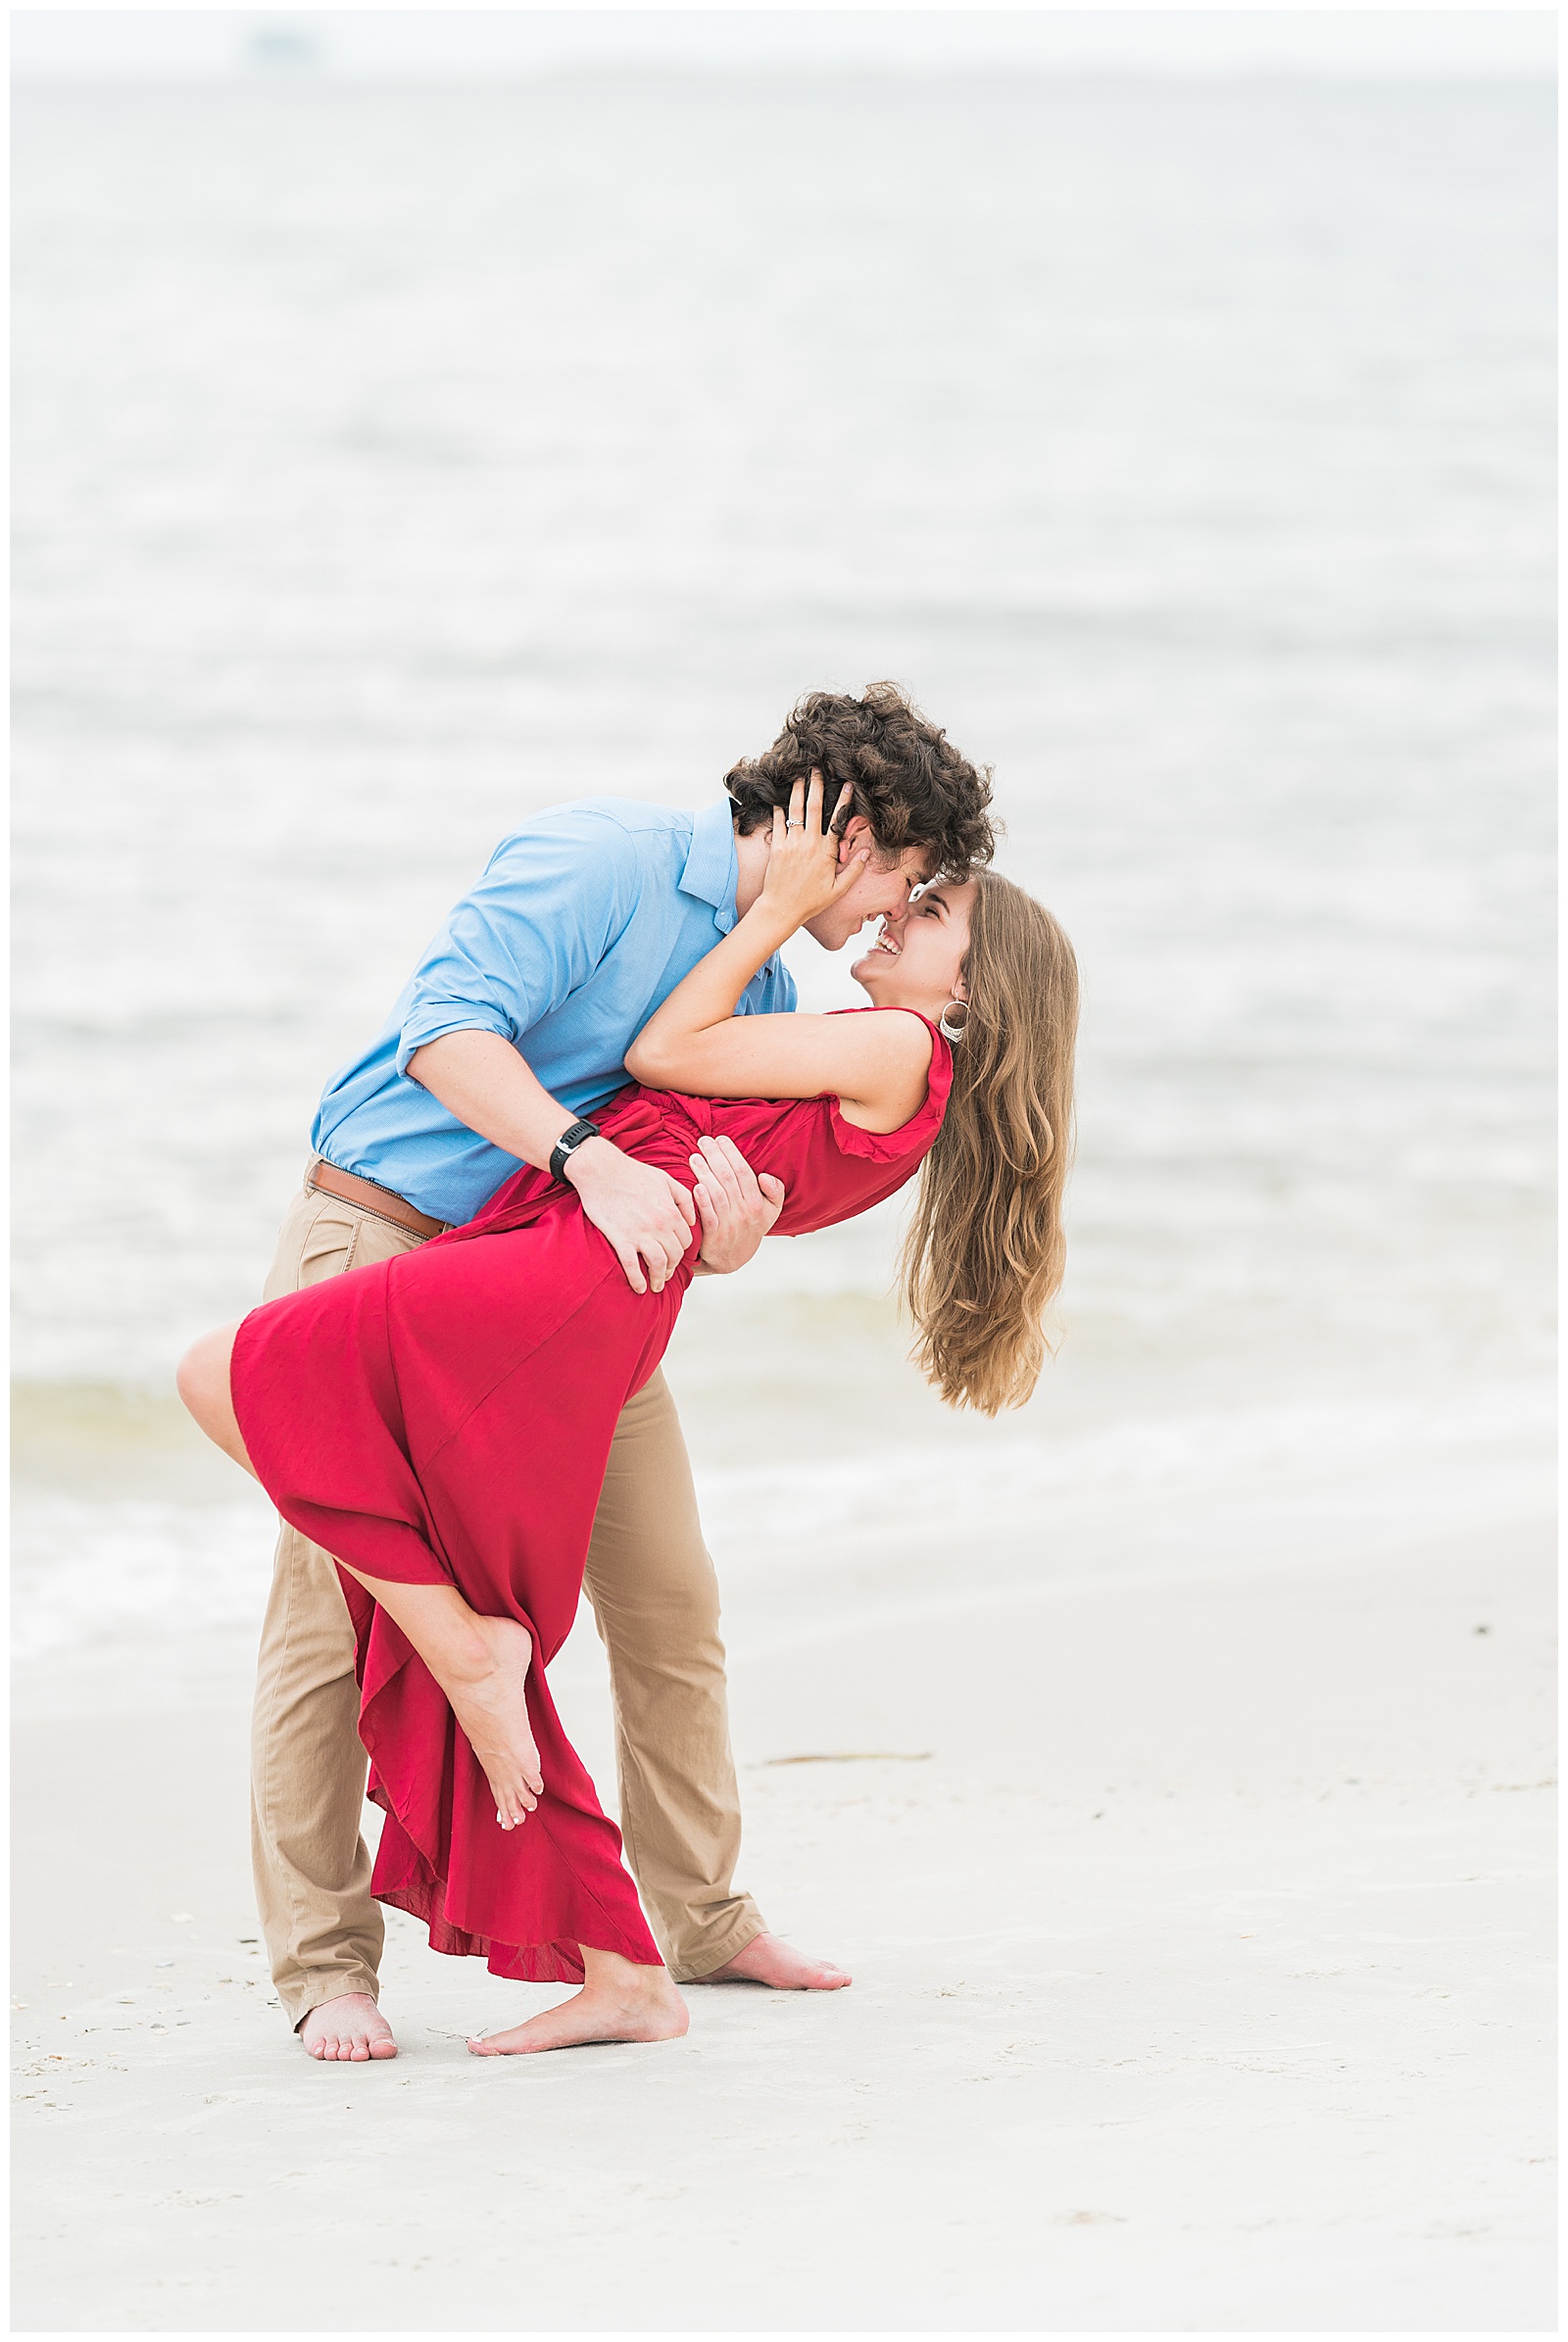 Engagement photos at the beach